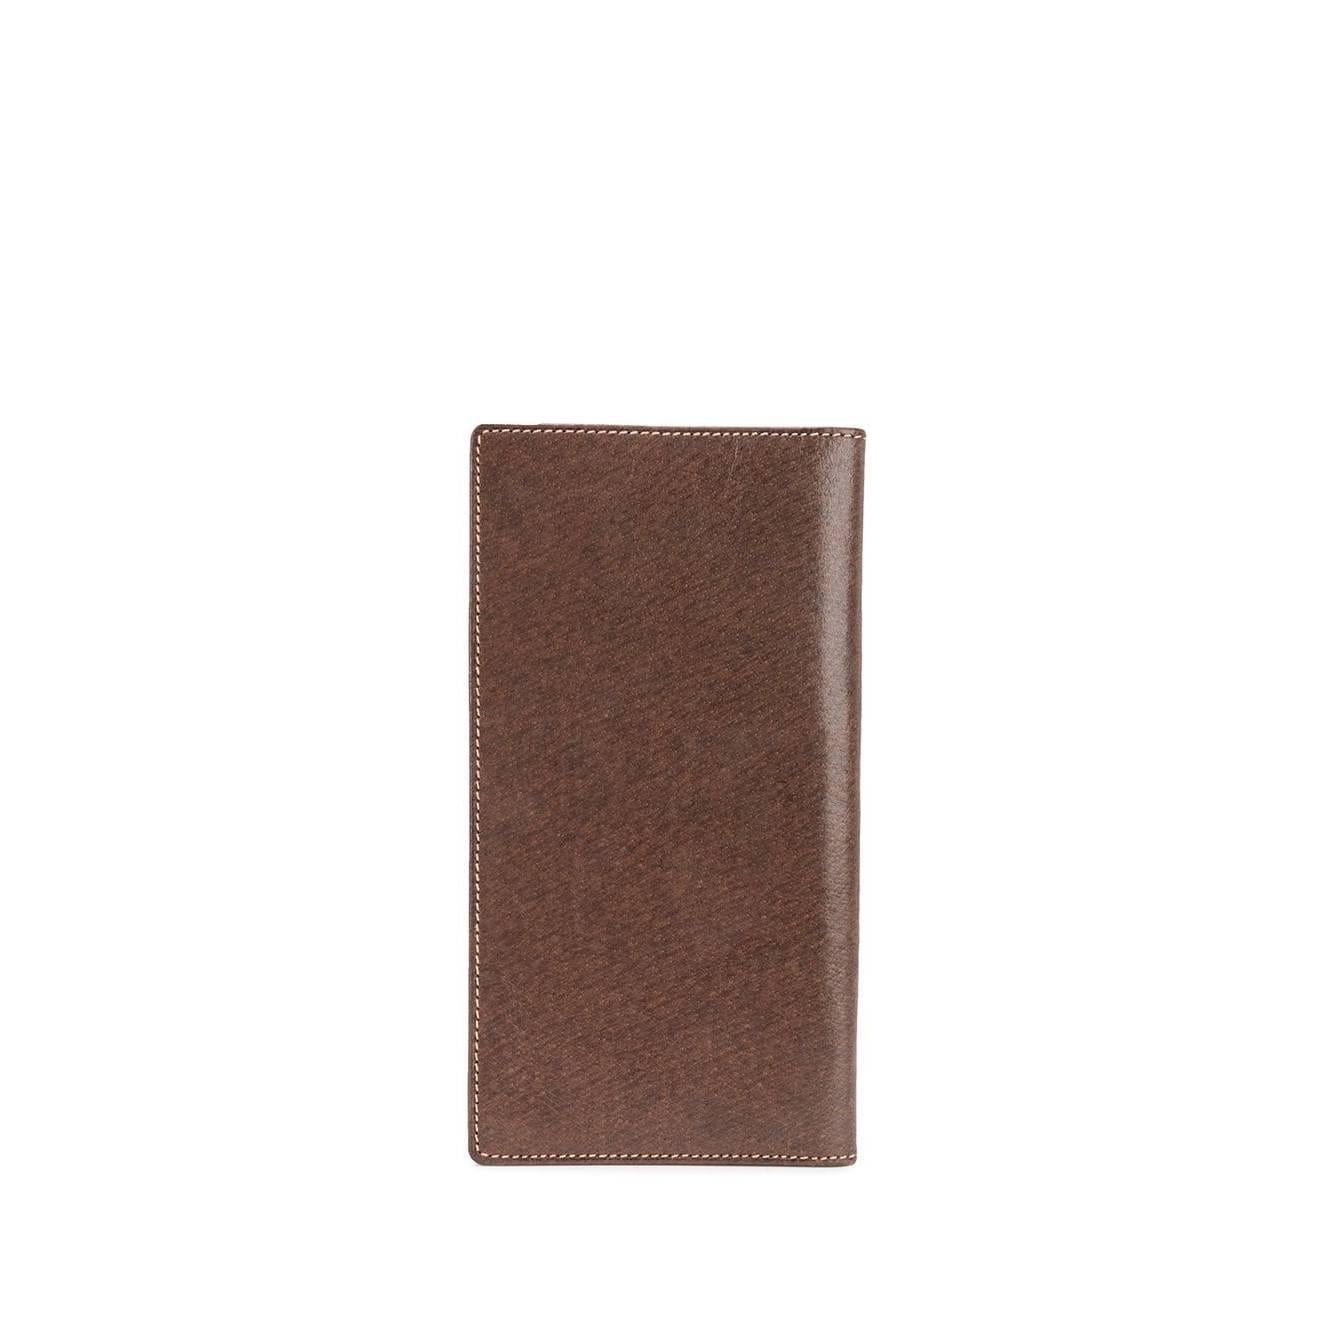 Gucci brown leather fold-over card case with golden embossed logo.
Years: 60s

Made in Italy

Card Case

Width: 7 cm
Height: 14,5 cm